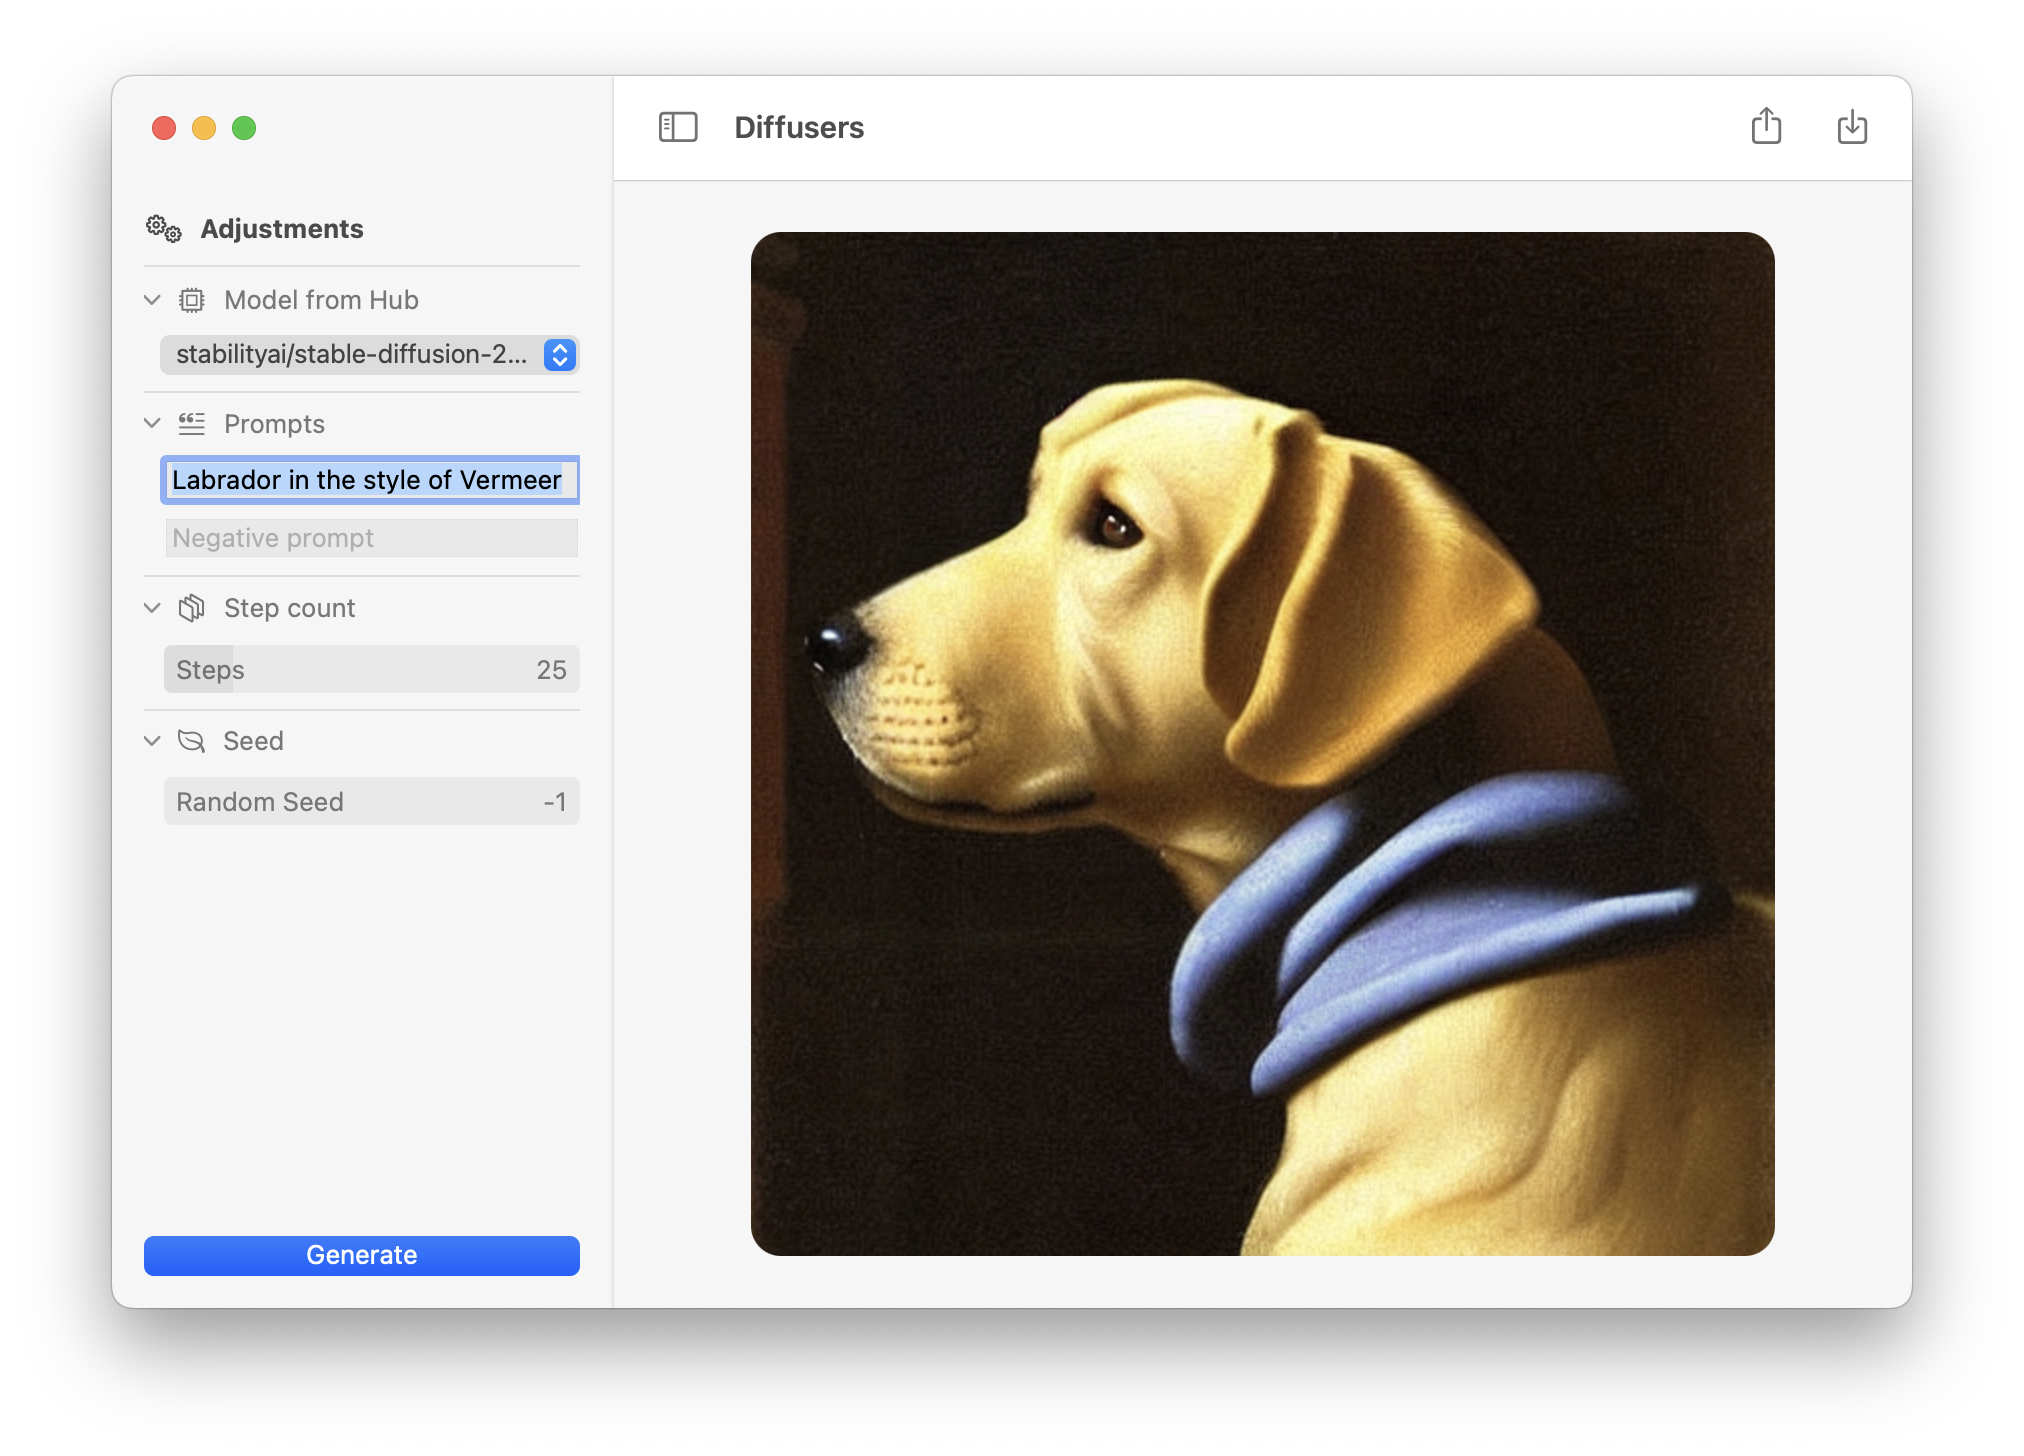 Diffusers is a Mac application that allows you to generate images from text  - GAMINGDEPUTY